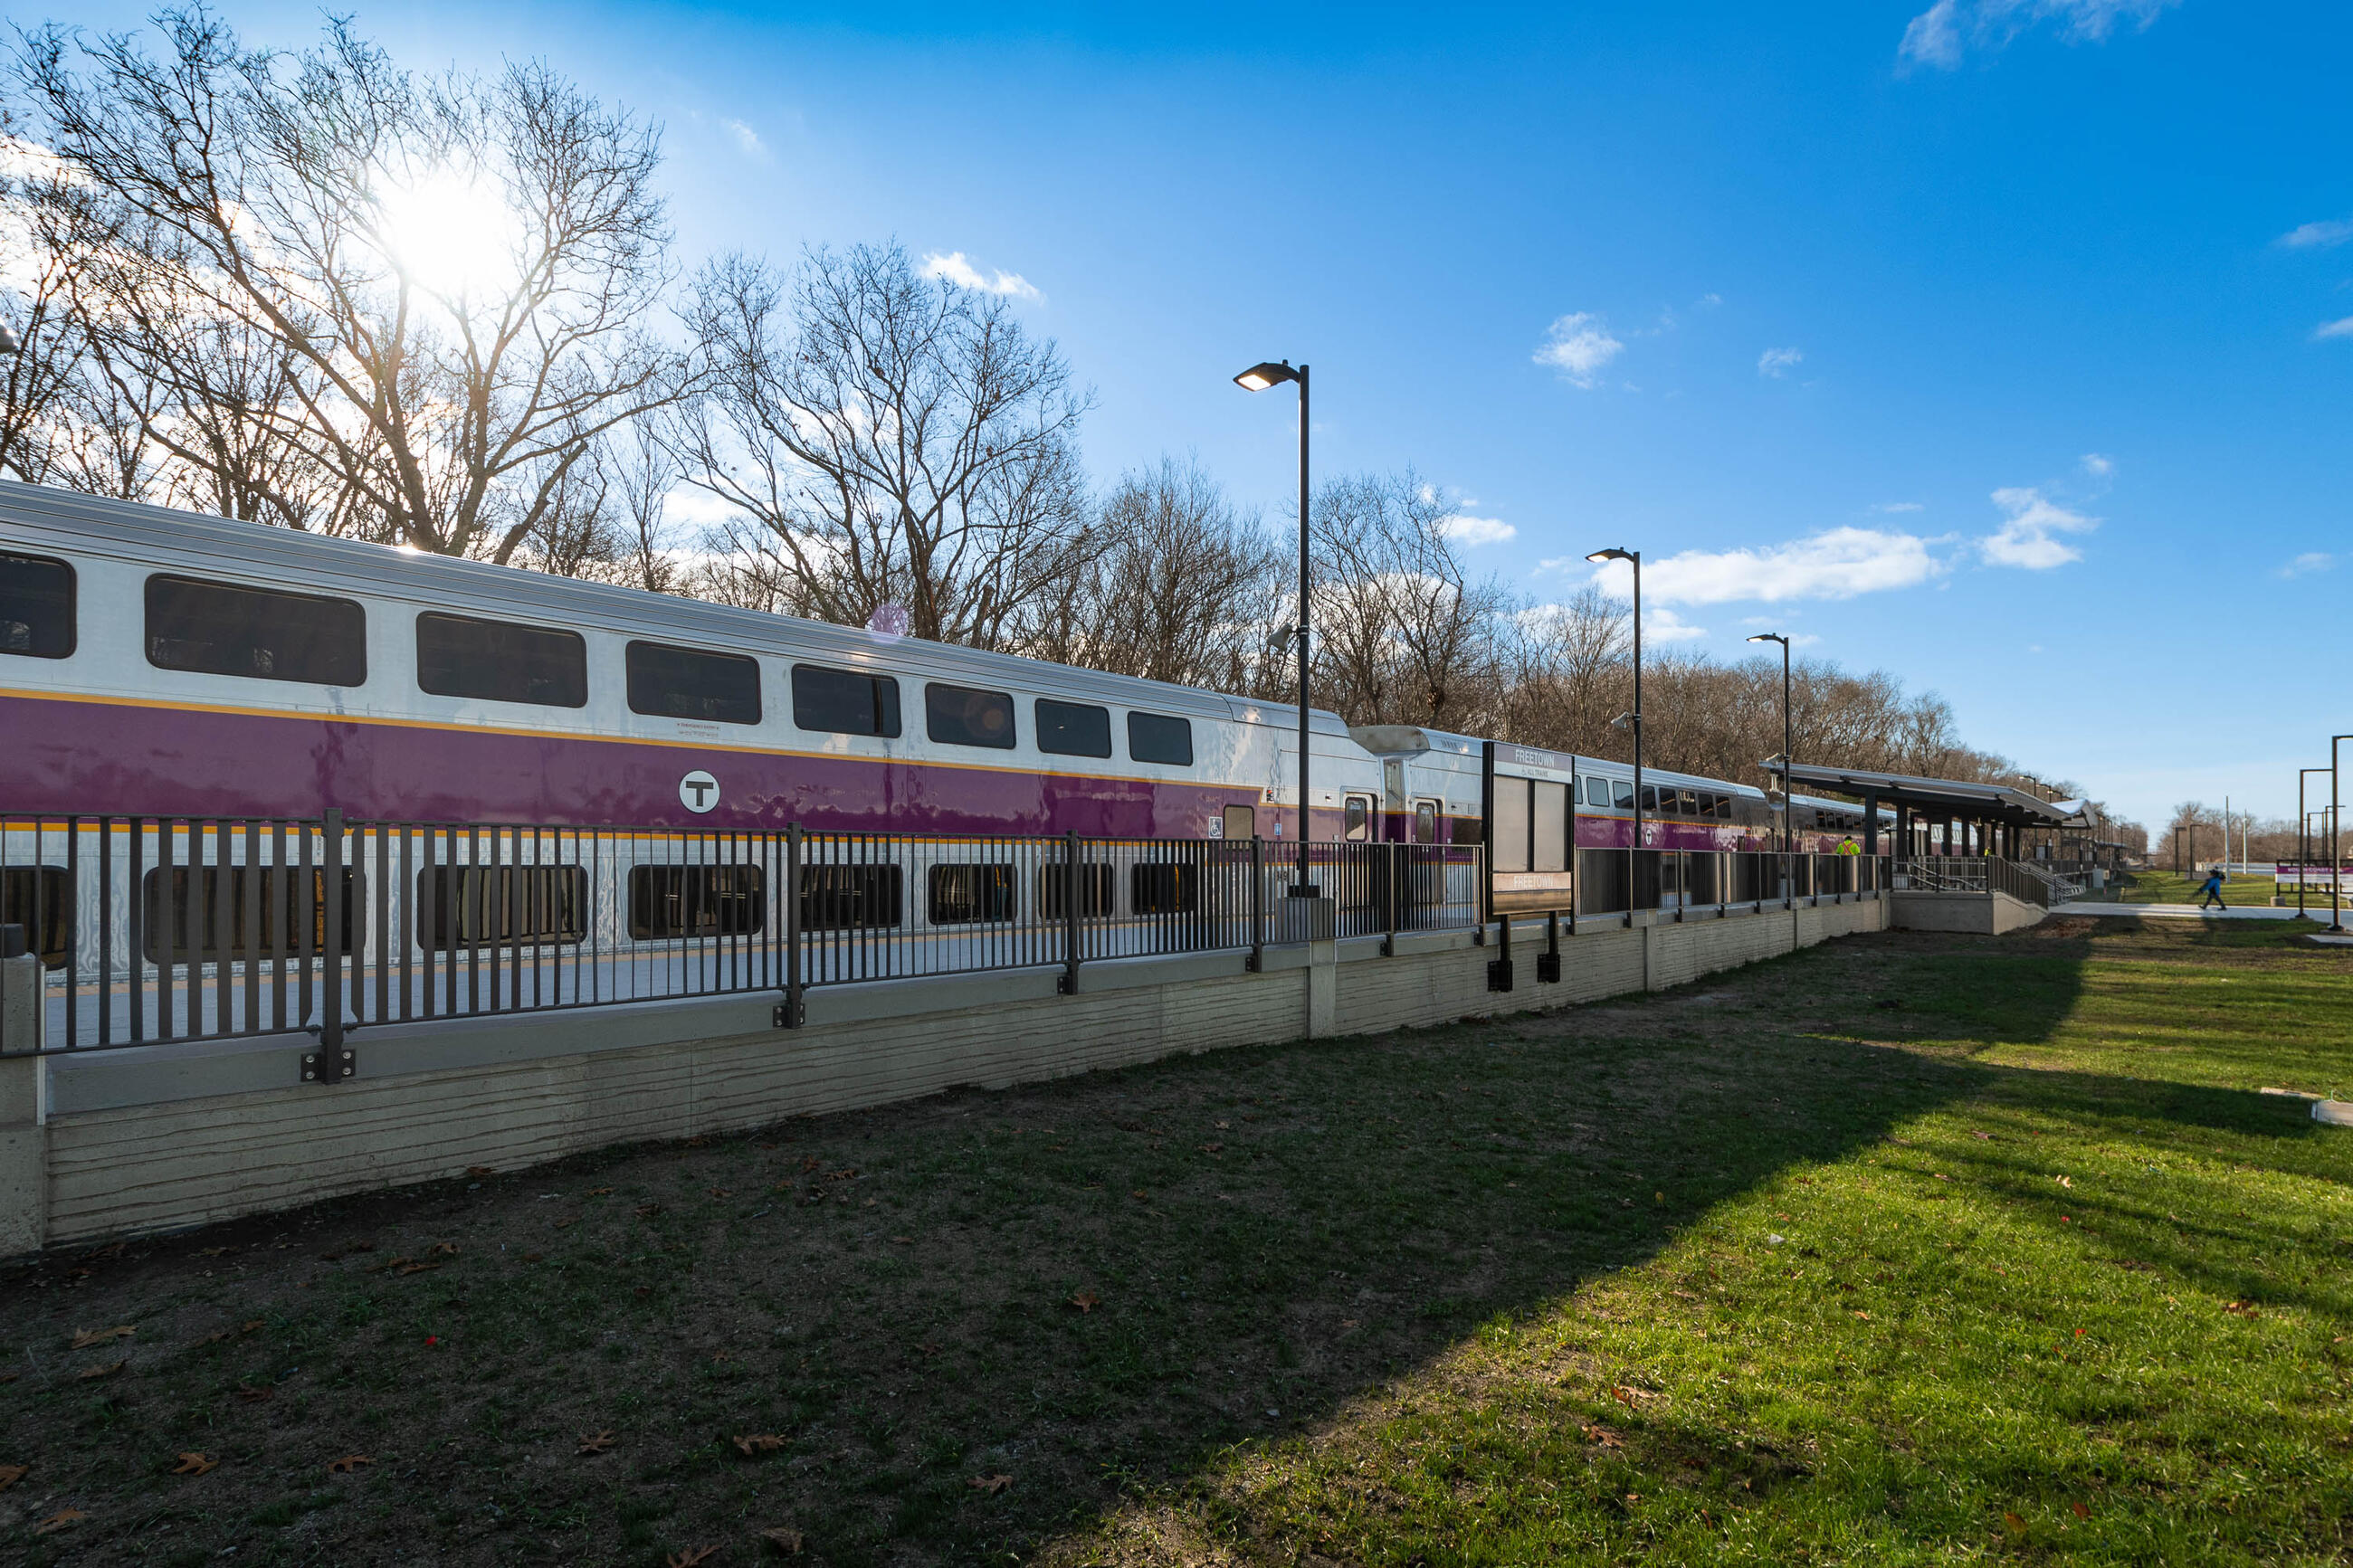 Bi-level Commuter Rail coaches at the newly-completed Freetown Station